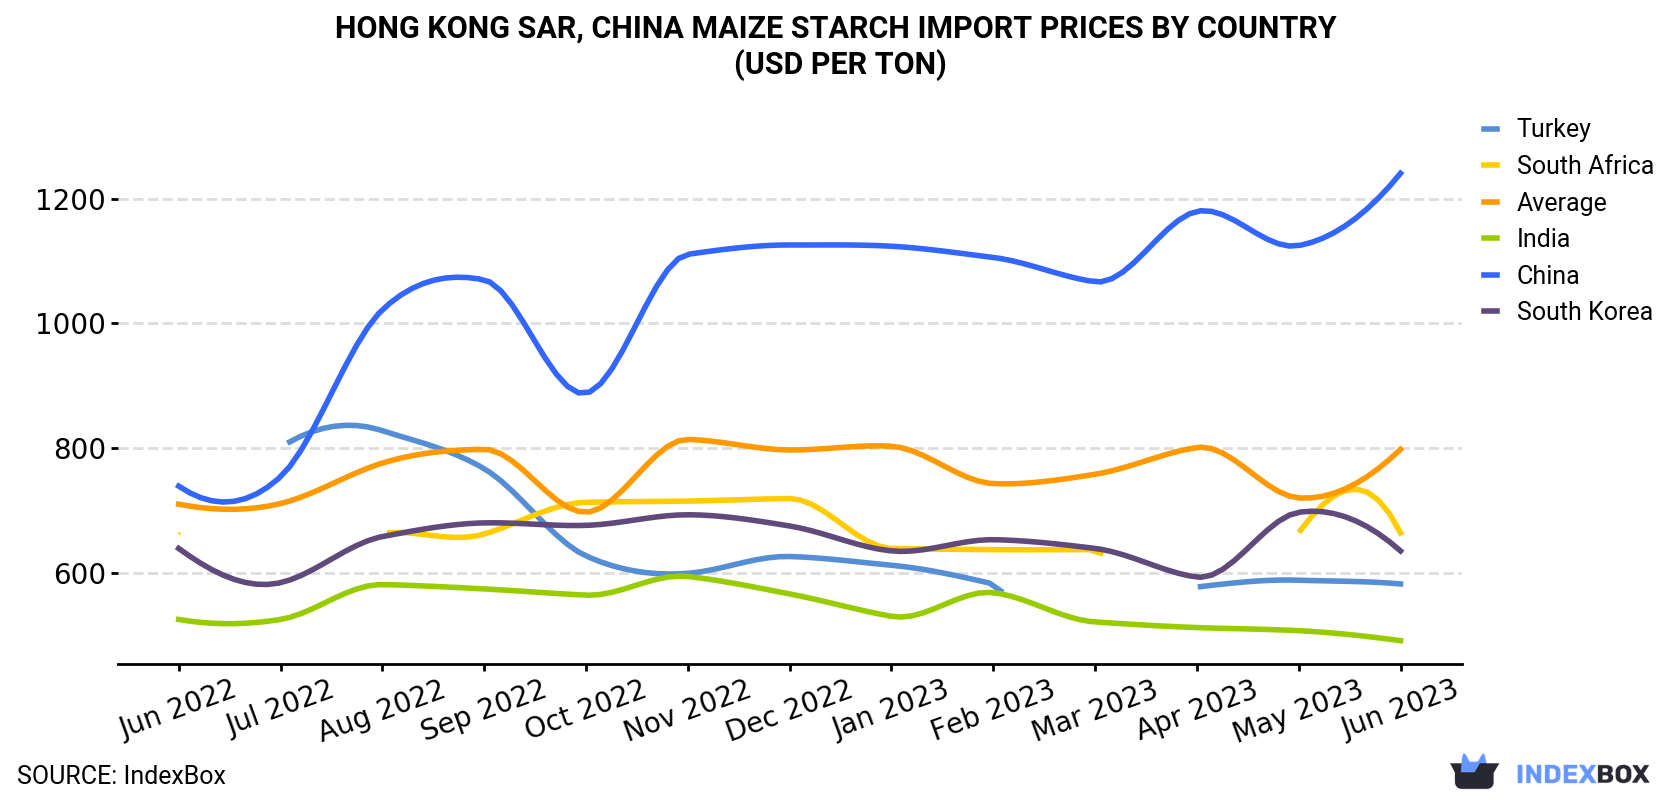 Hong Kong Maize Starch Import Prices By Country (USD Per Ton)